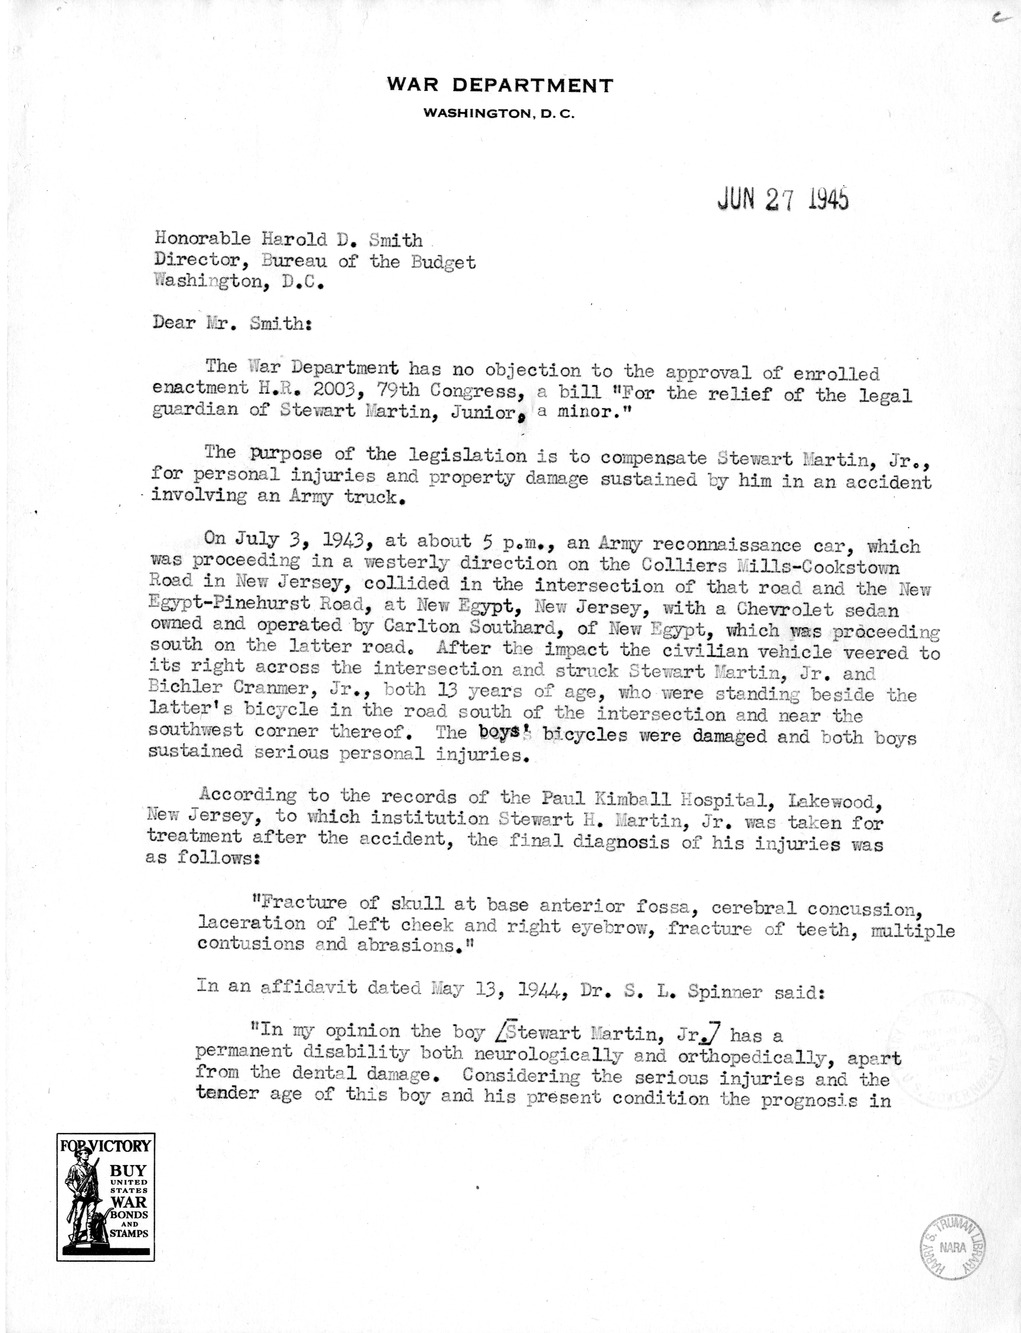 Memorandum from Frederick J. Bailey to M. C. Latta, H.R. 2003, For the Relief of the Legal Guardian of Stewart Martin, Junior, a Minor, with Attachments